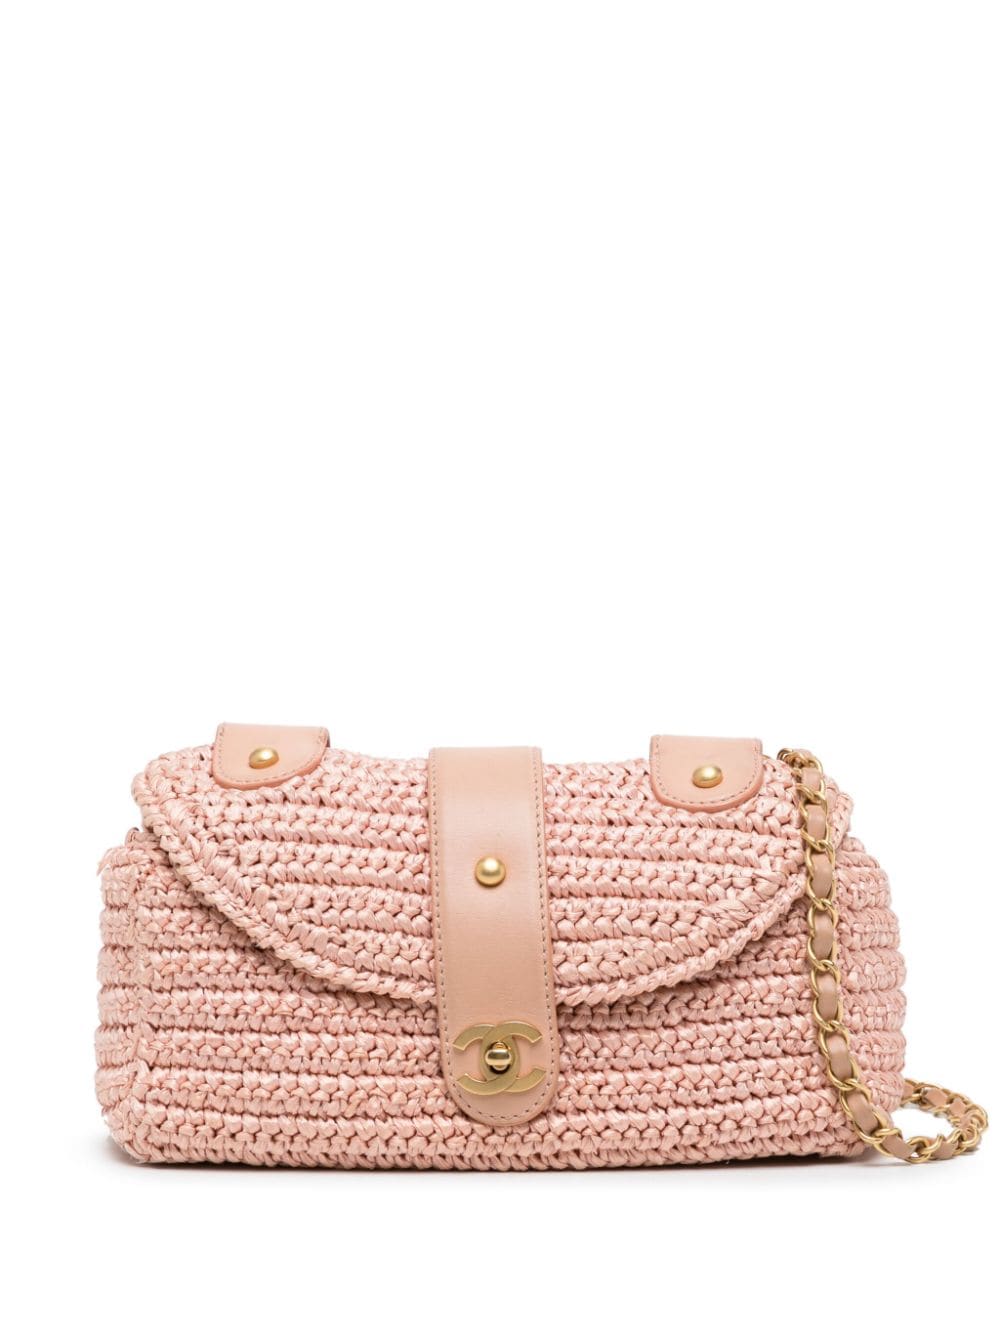 Pre-owned Chanel Cc Woven Raffia Shoulder Bag In Pink